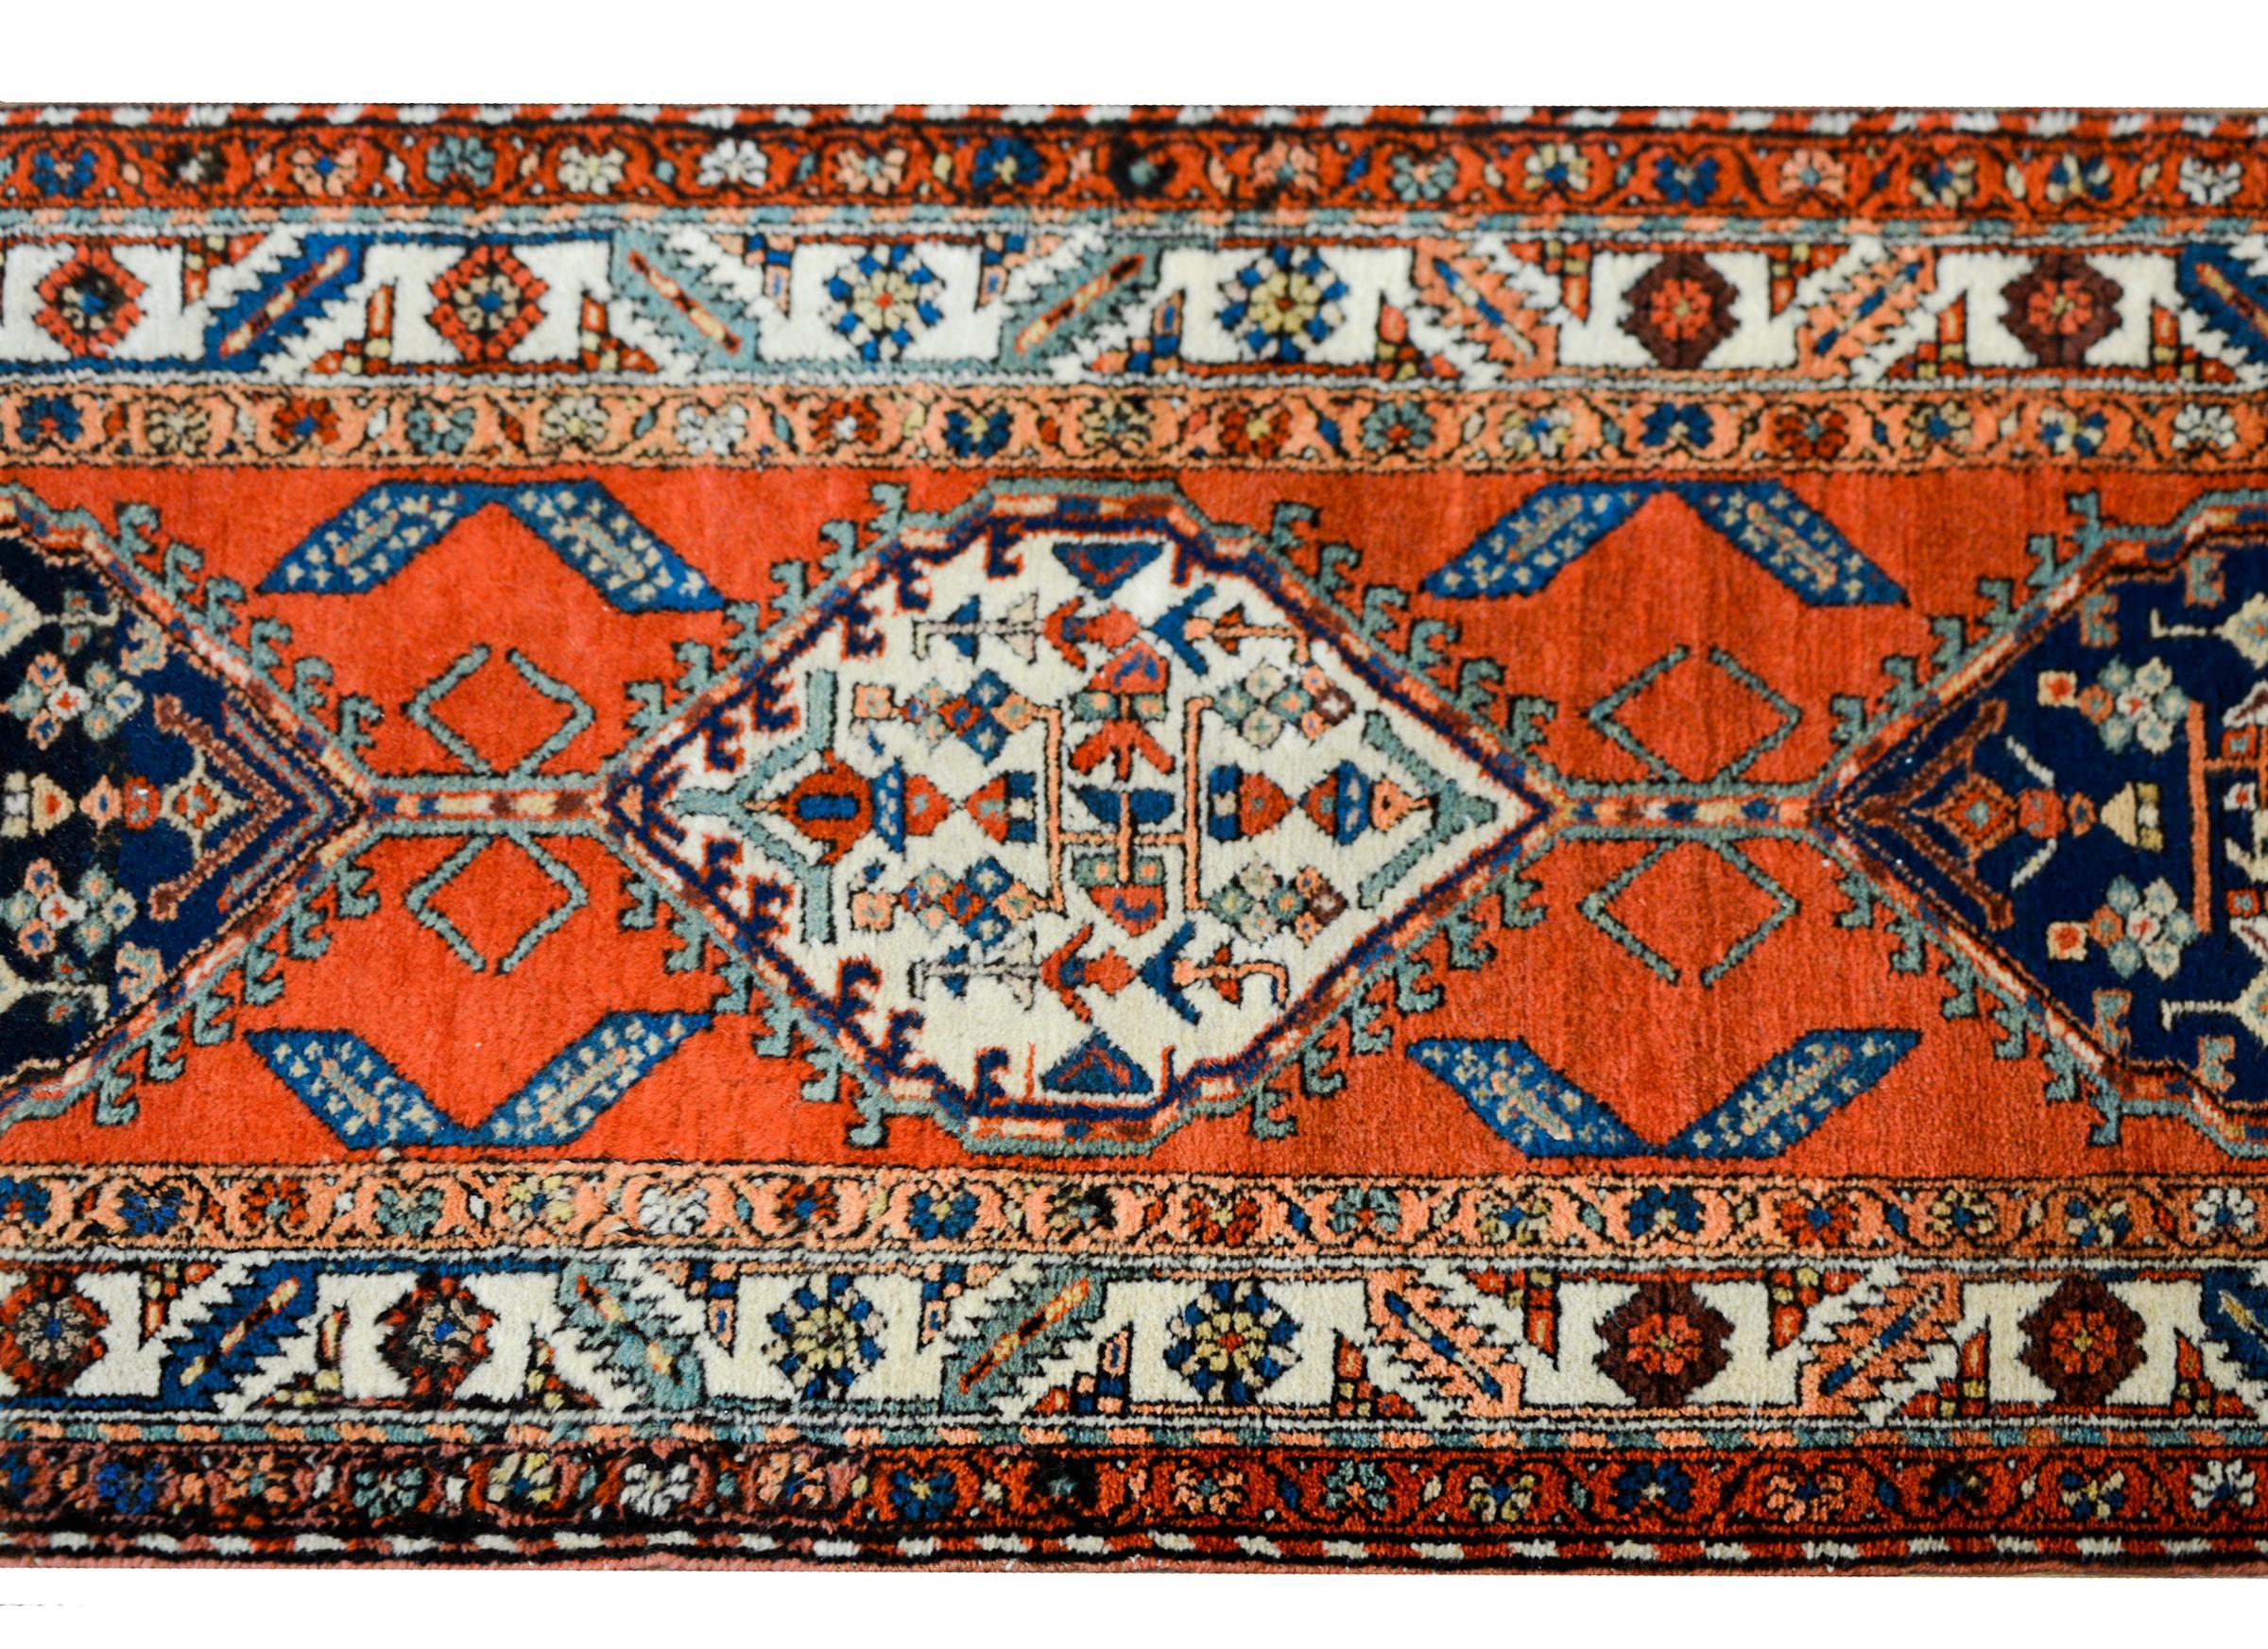 A bold early 20th century Persian Malayer runner with several diamond medallions against a crimson background and surrounded by a wonderful border with more stylized flowers and leaves, all woven in light and dark indigo, white, crimson, and gold.